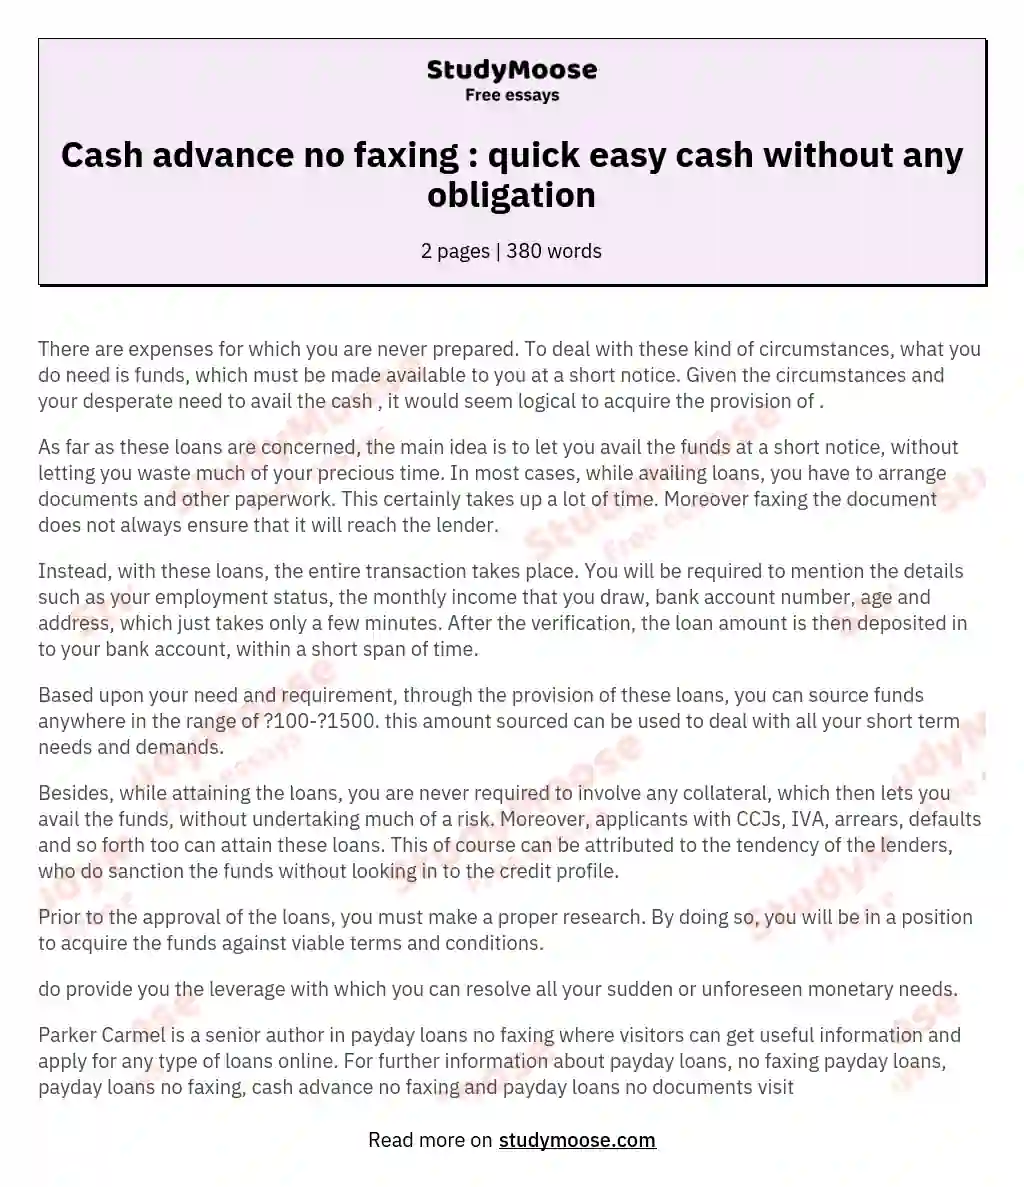 Cash advance no faxing : quick easy cash without any obligation essay